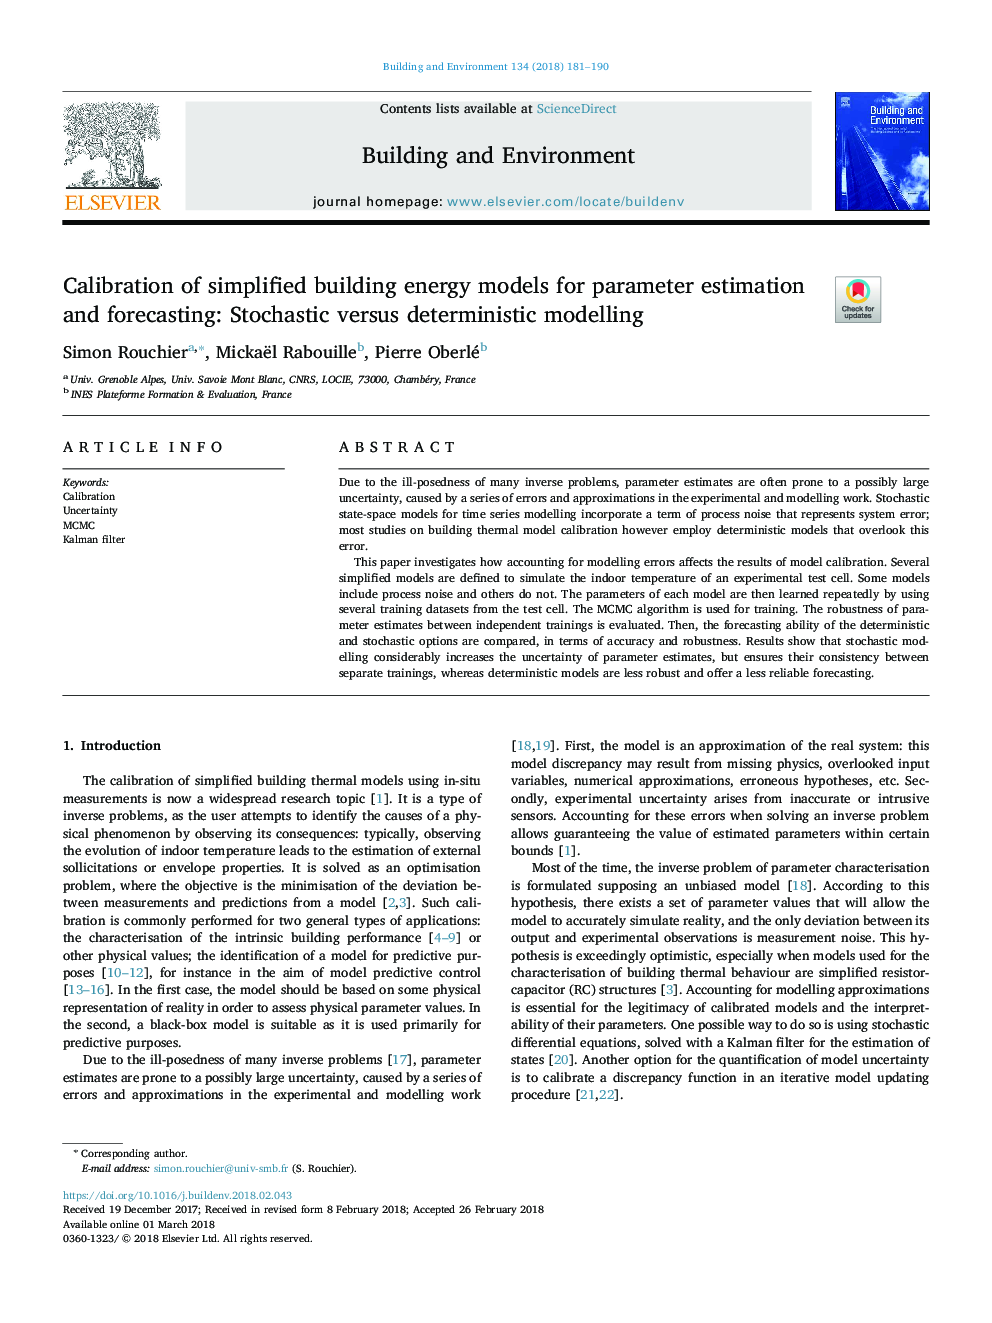 Calibration of simplified building energy models for parameter estimation and forecasting: Stochastic versus deterministic modelling